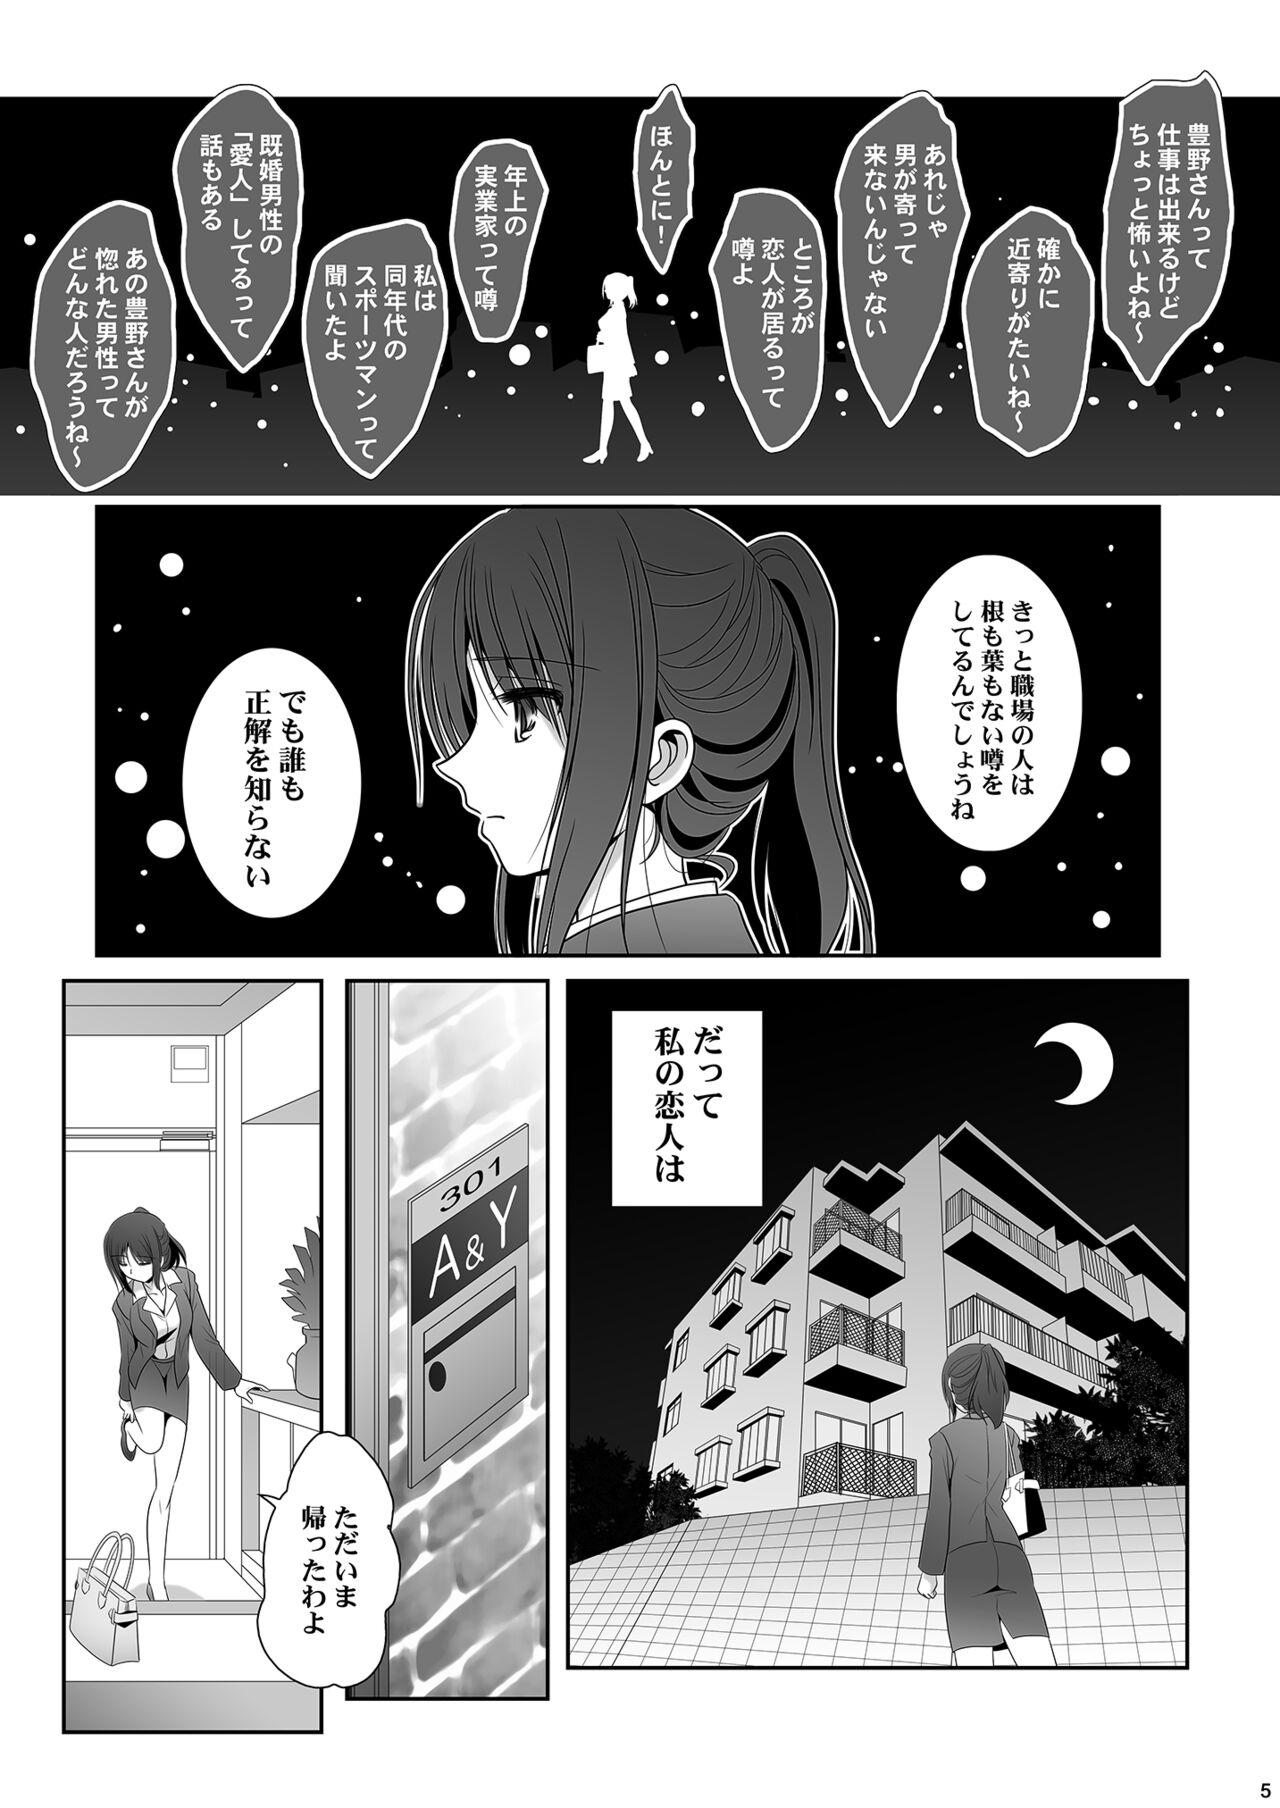 Mask Toshi no Thirteen - Age Difference is 13 Years - Original Real Amateurs - Page 5